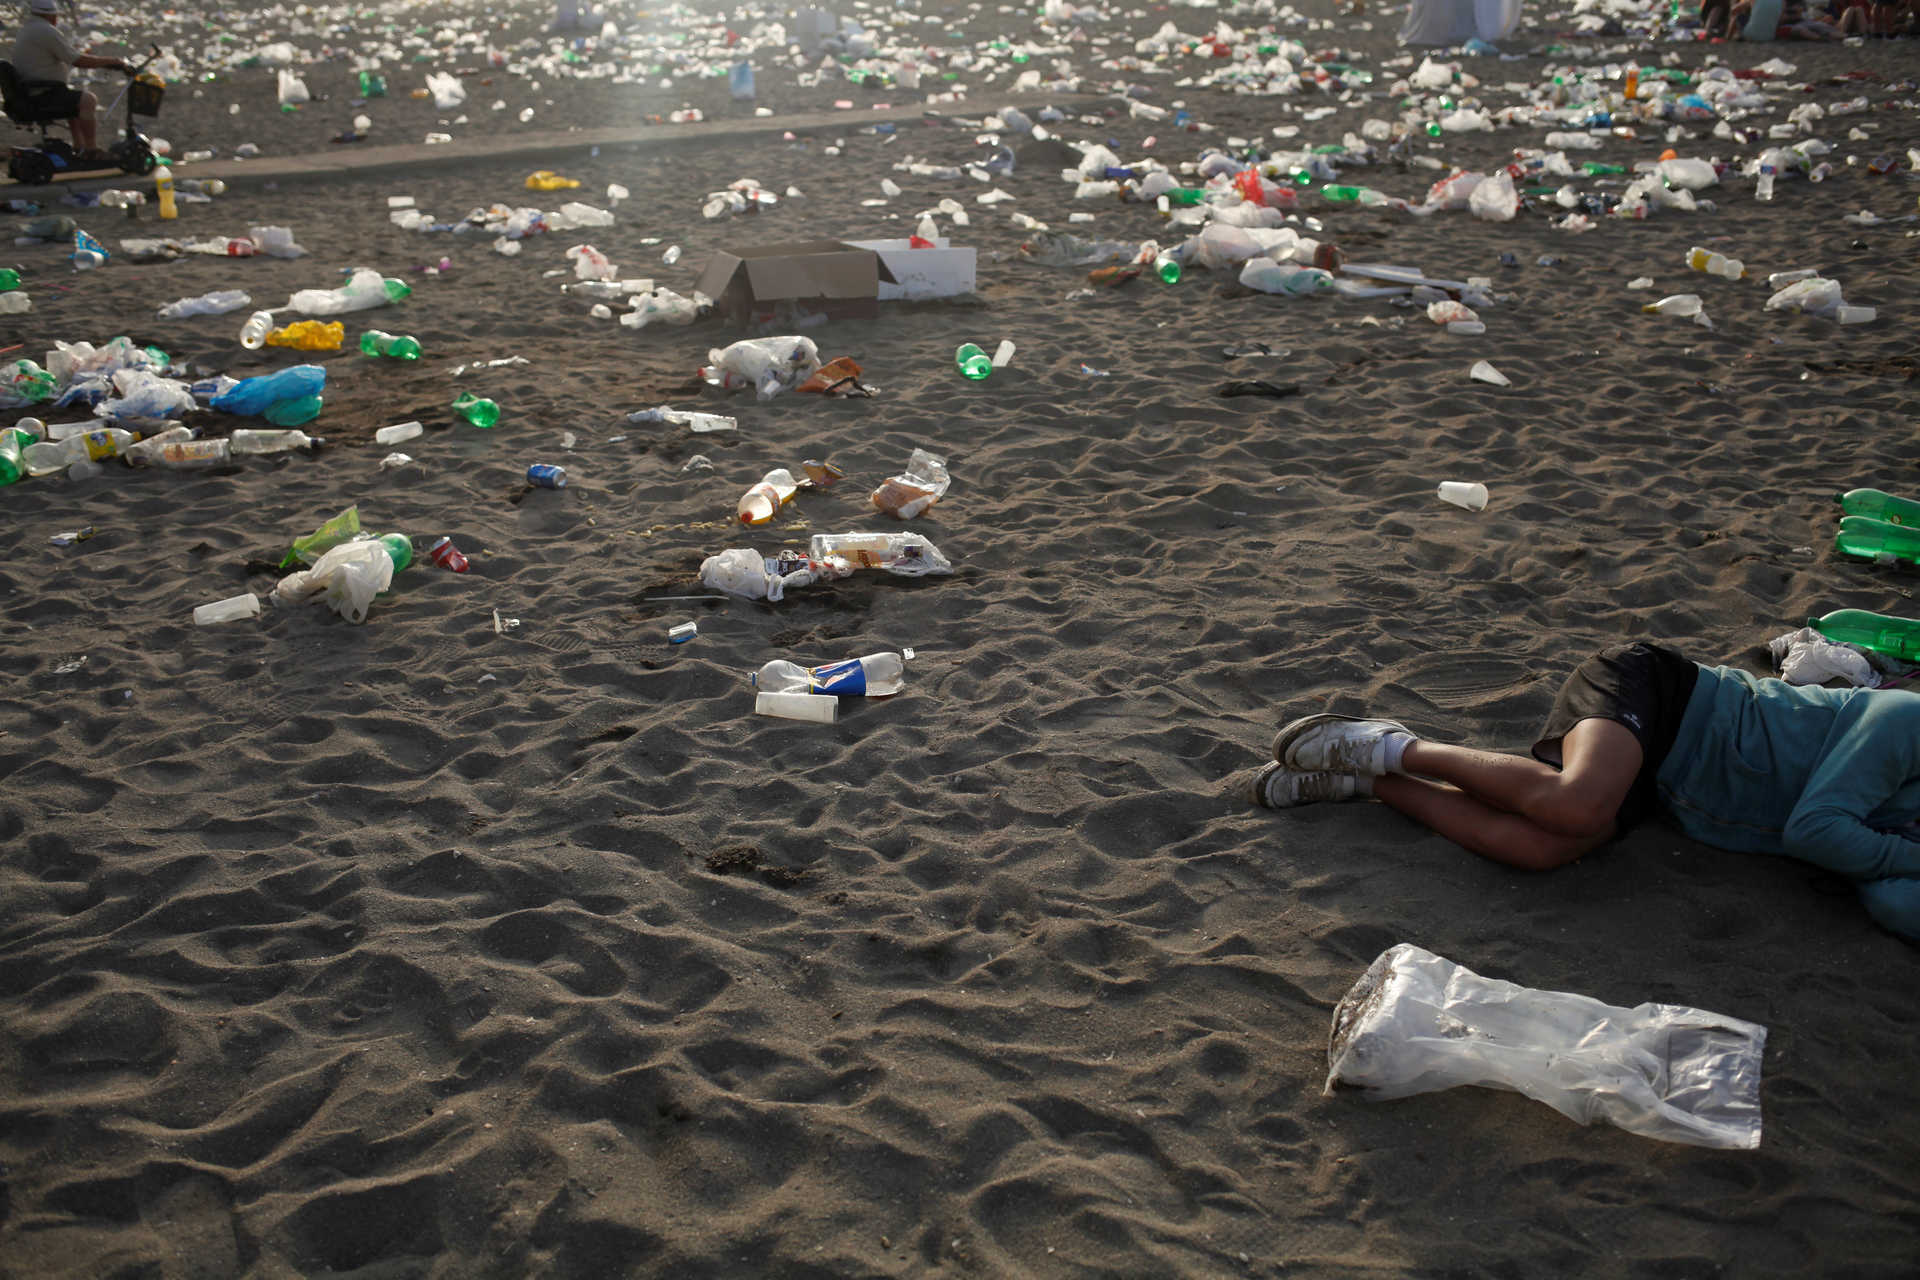 A young man sleeps surrounded by rubbish at dawn at Malagueta beach after celebrating the summer solstice in Malaga